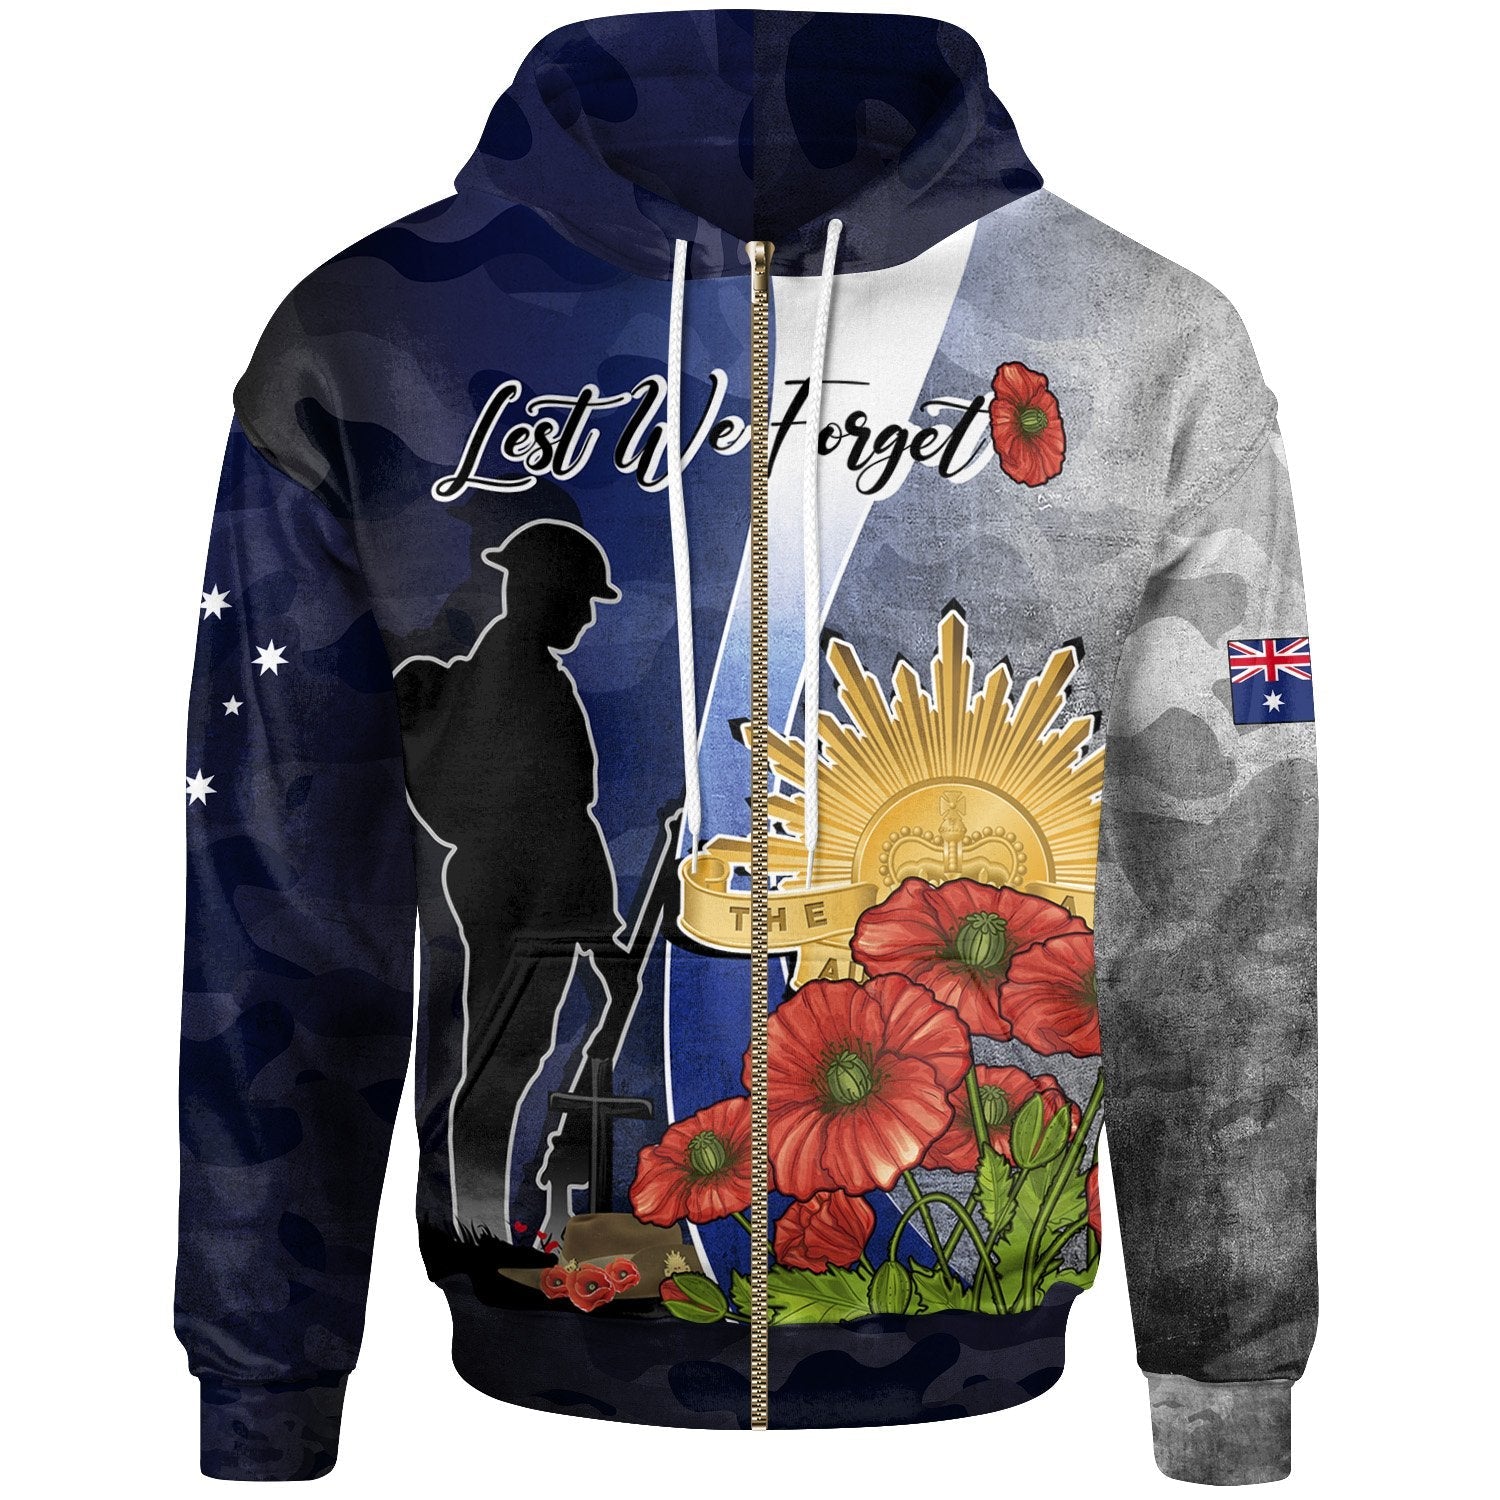 anzac-day-zip-up-hoodie-lest-we-forget-poppy-flower